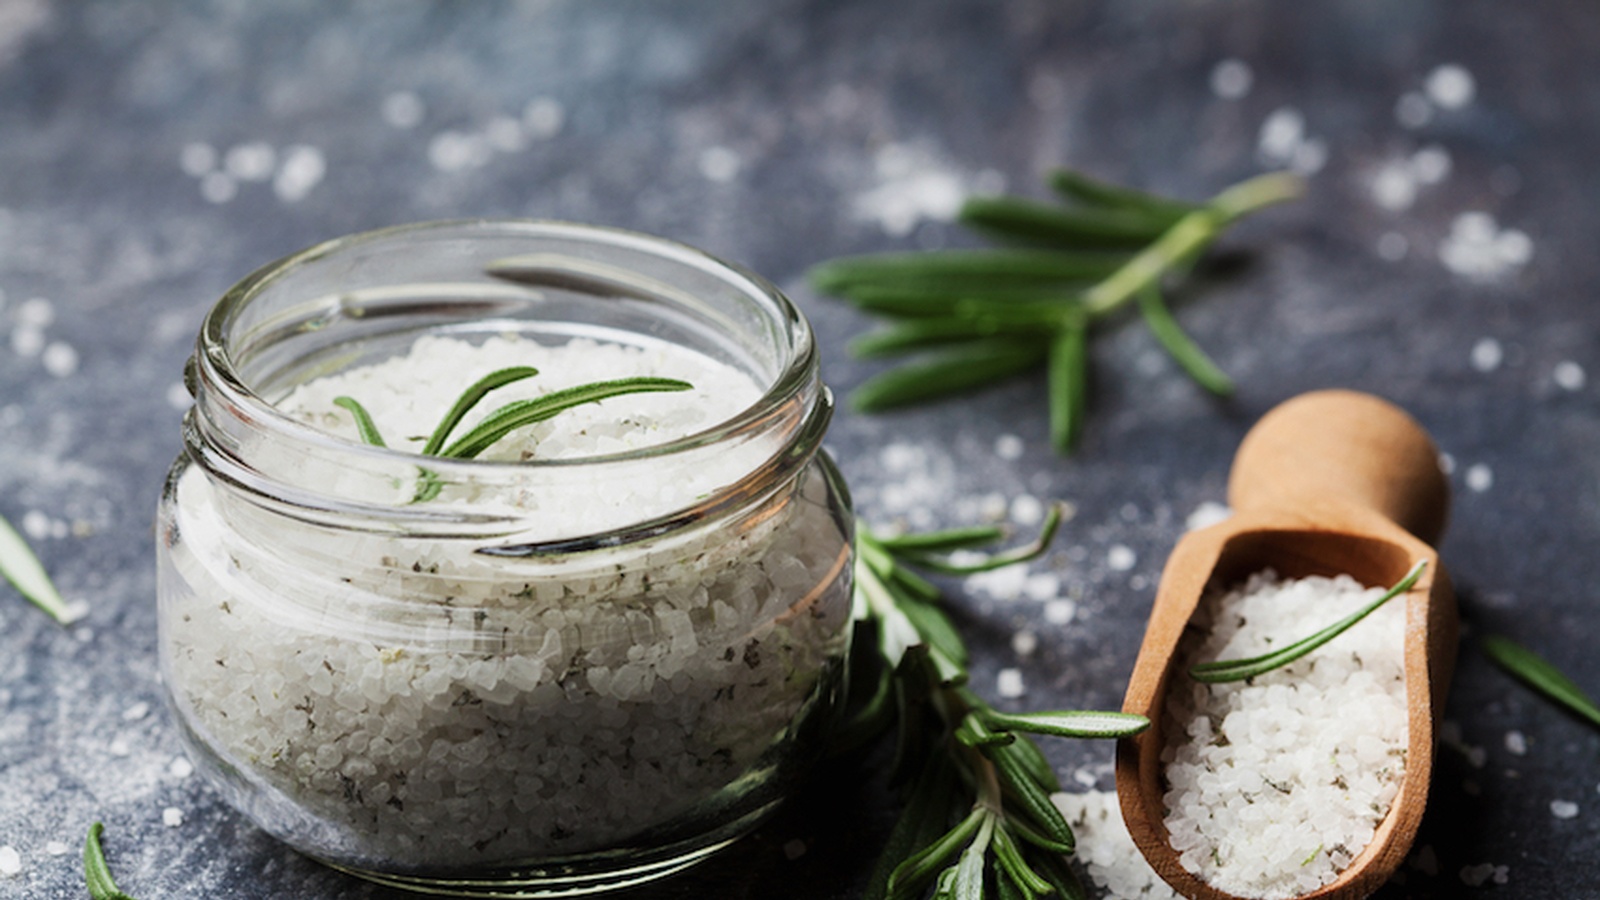 DIY Herbal Bath Salts for Muscle Relaxation